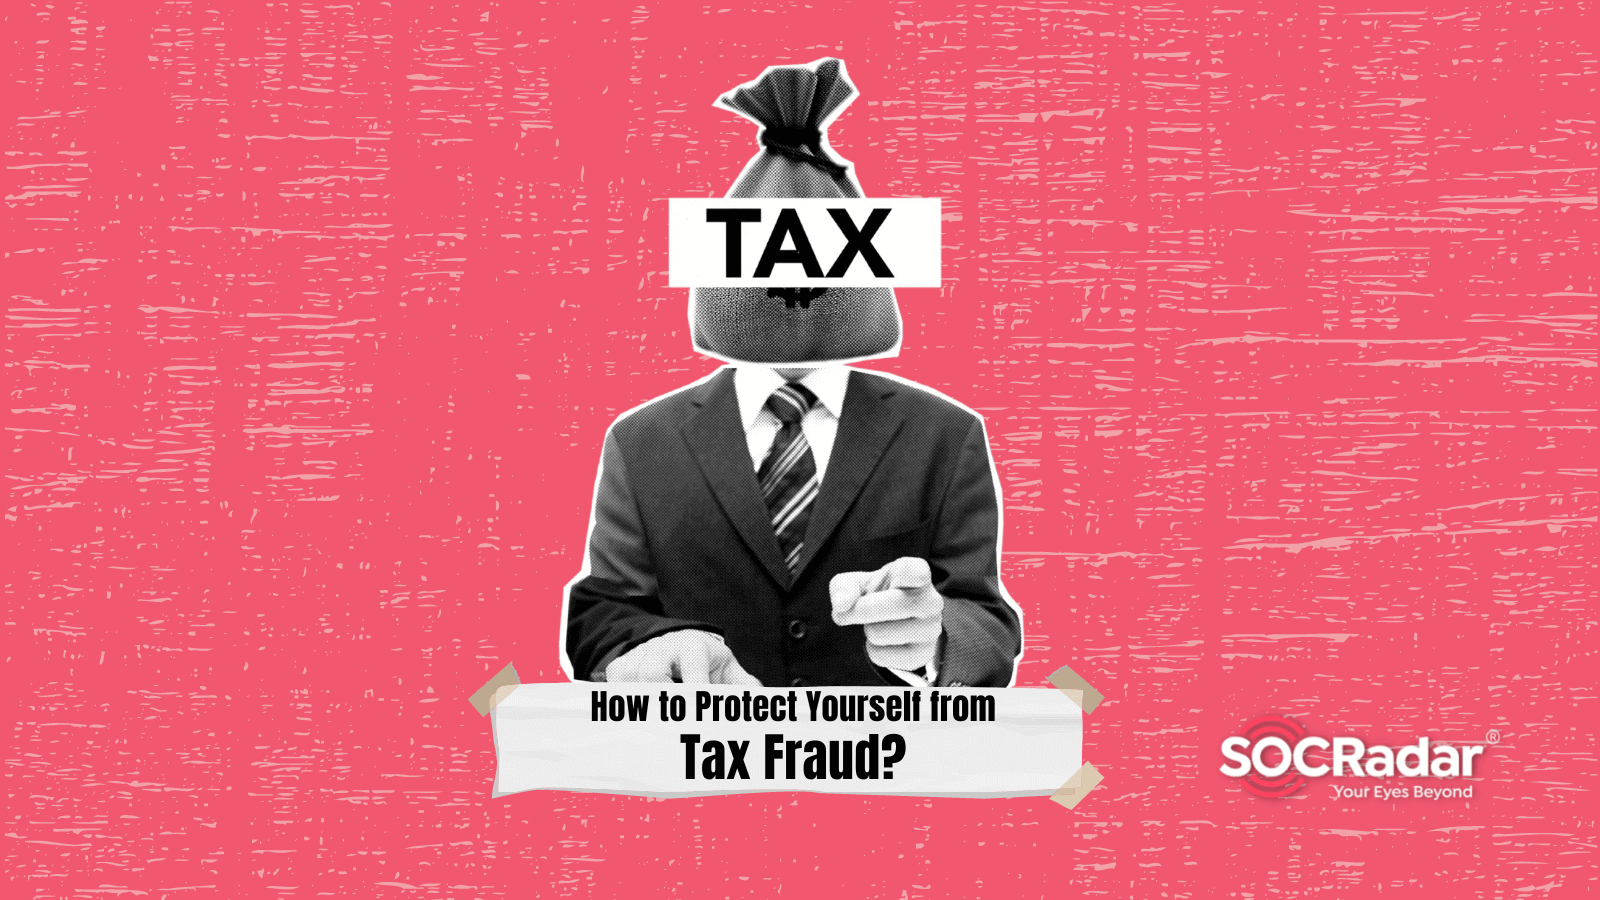 SOCRadar® Cyber Intelligence Inc. | How to Protect Yourself from Cyber Attacks During Tax Season?